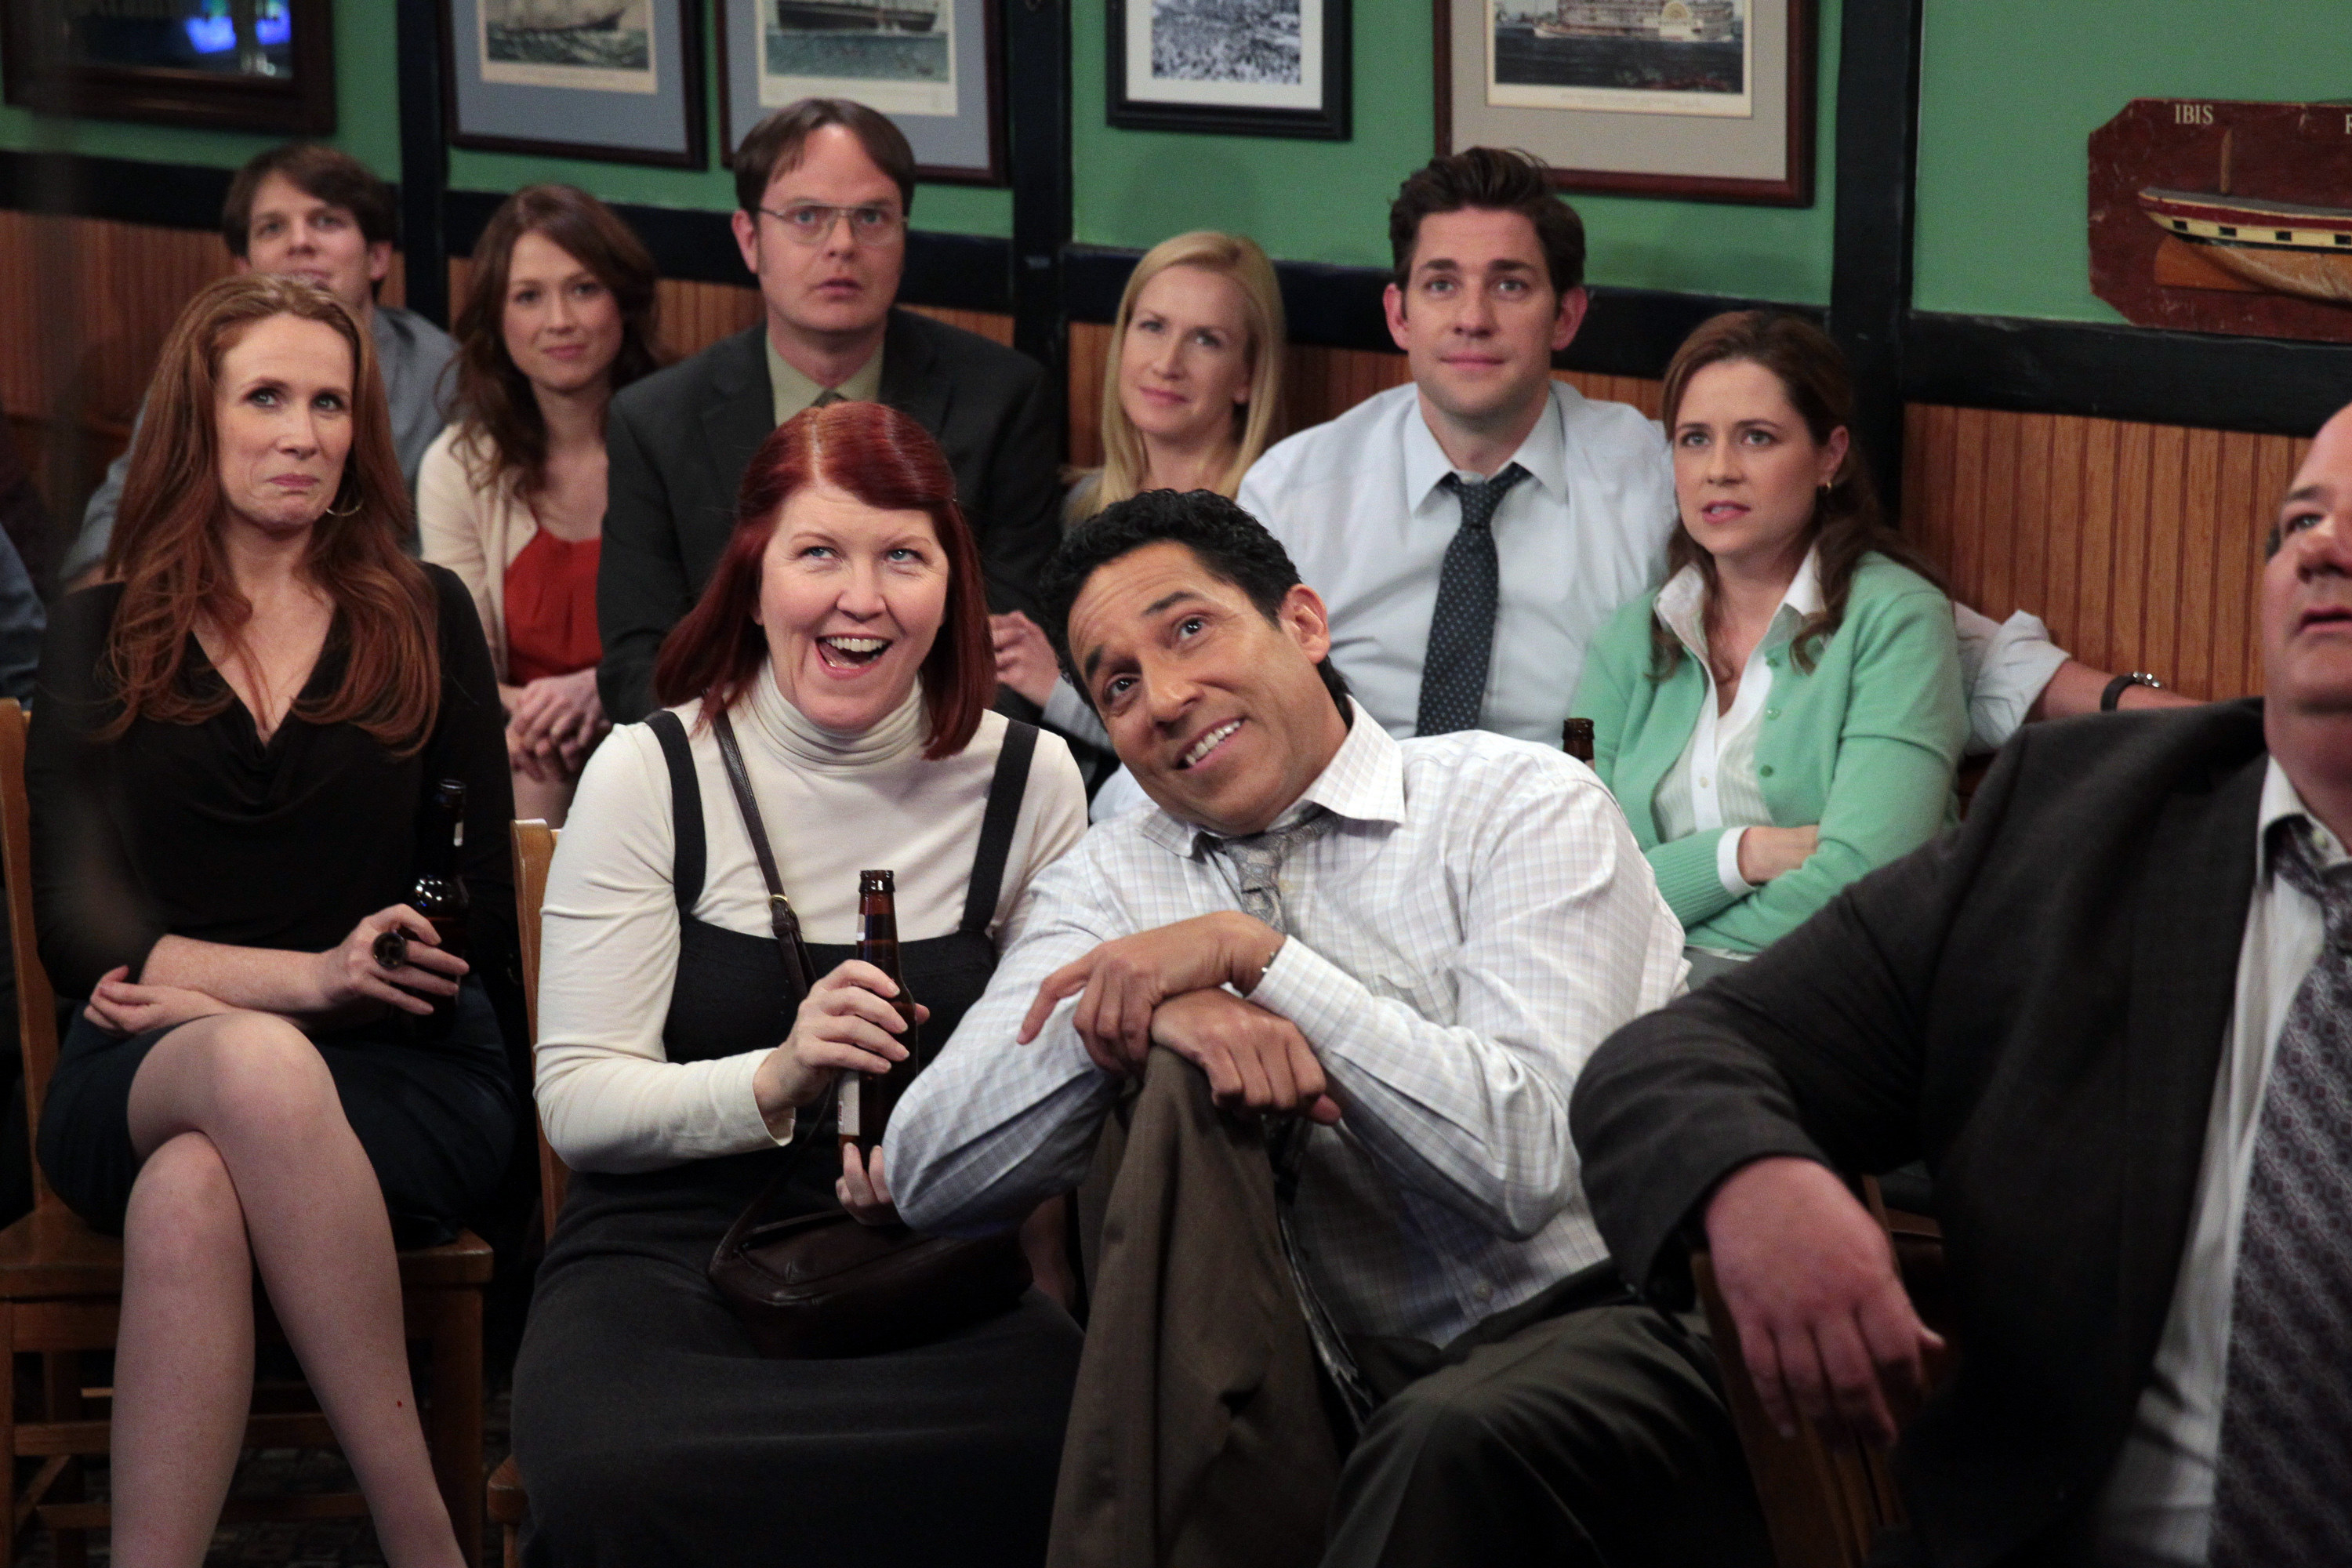 The cast of &quot;The Office&quot; in a bar